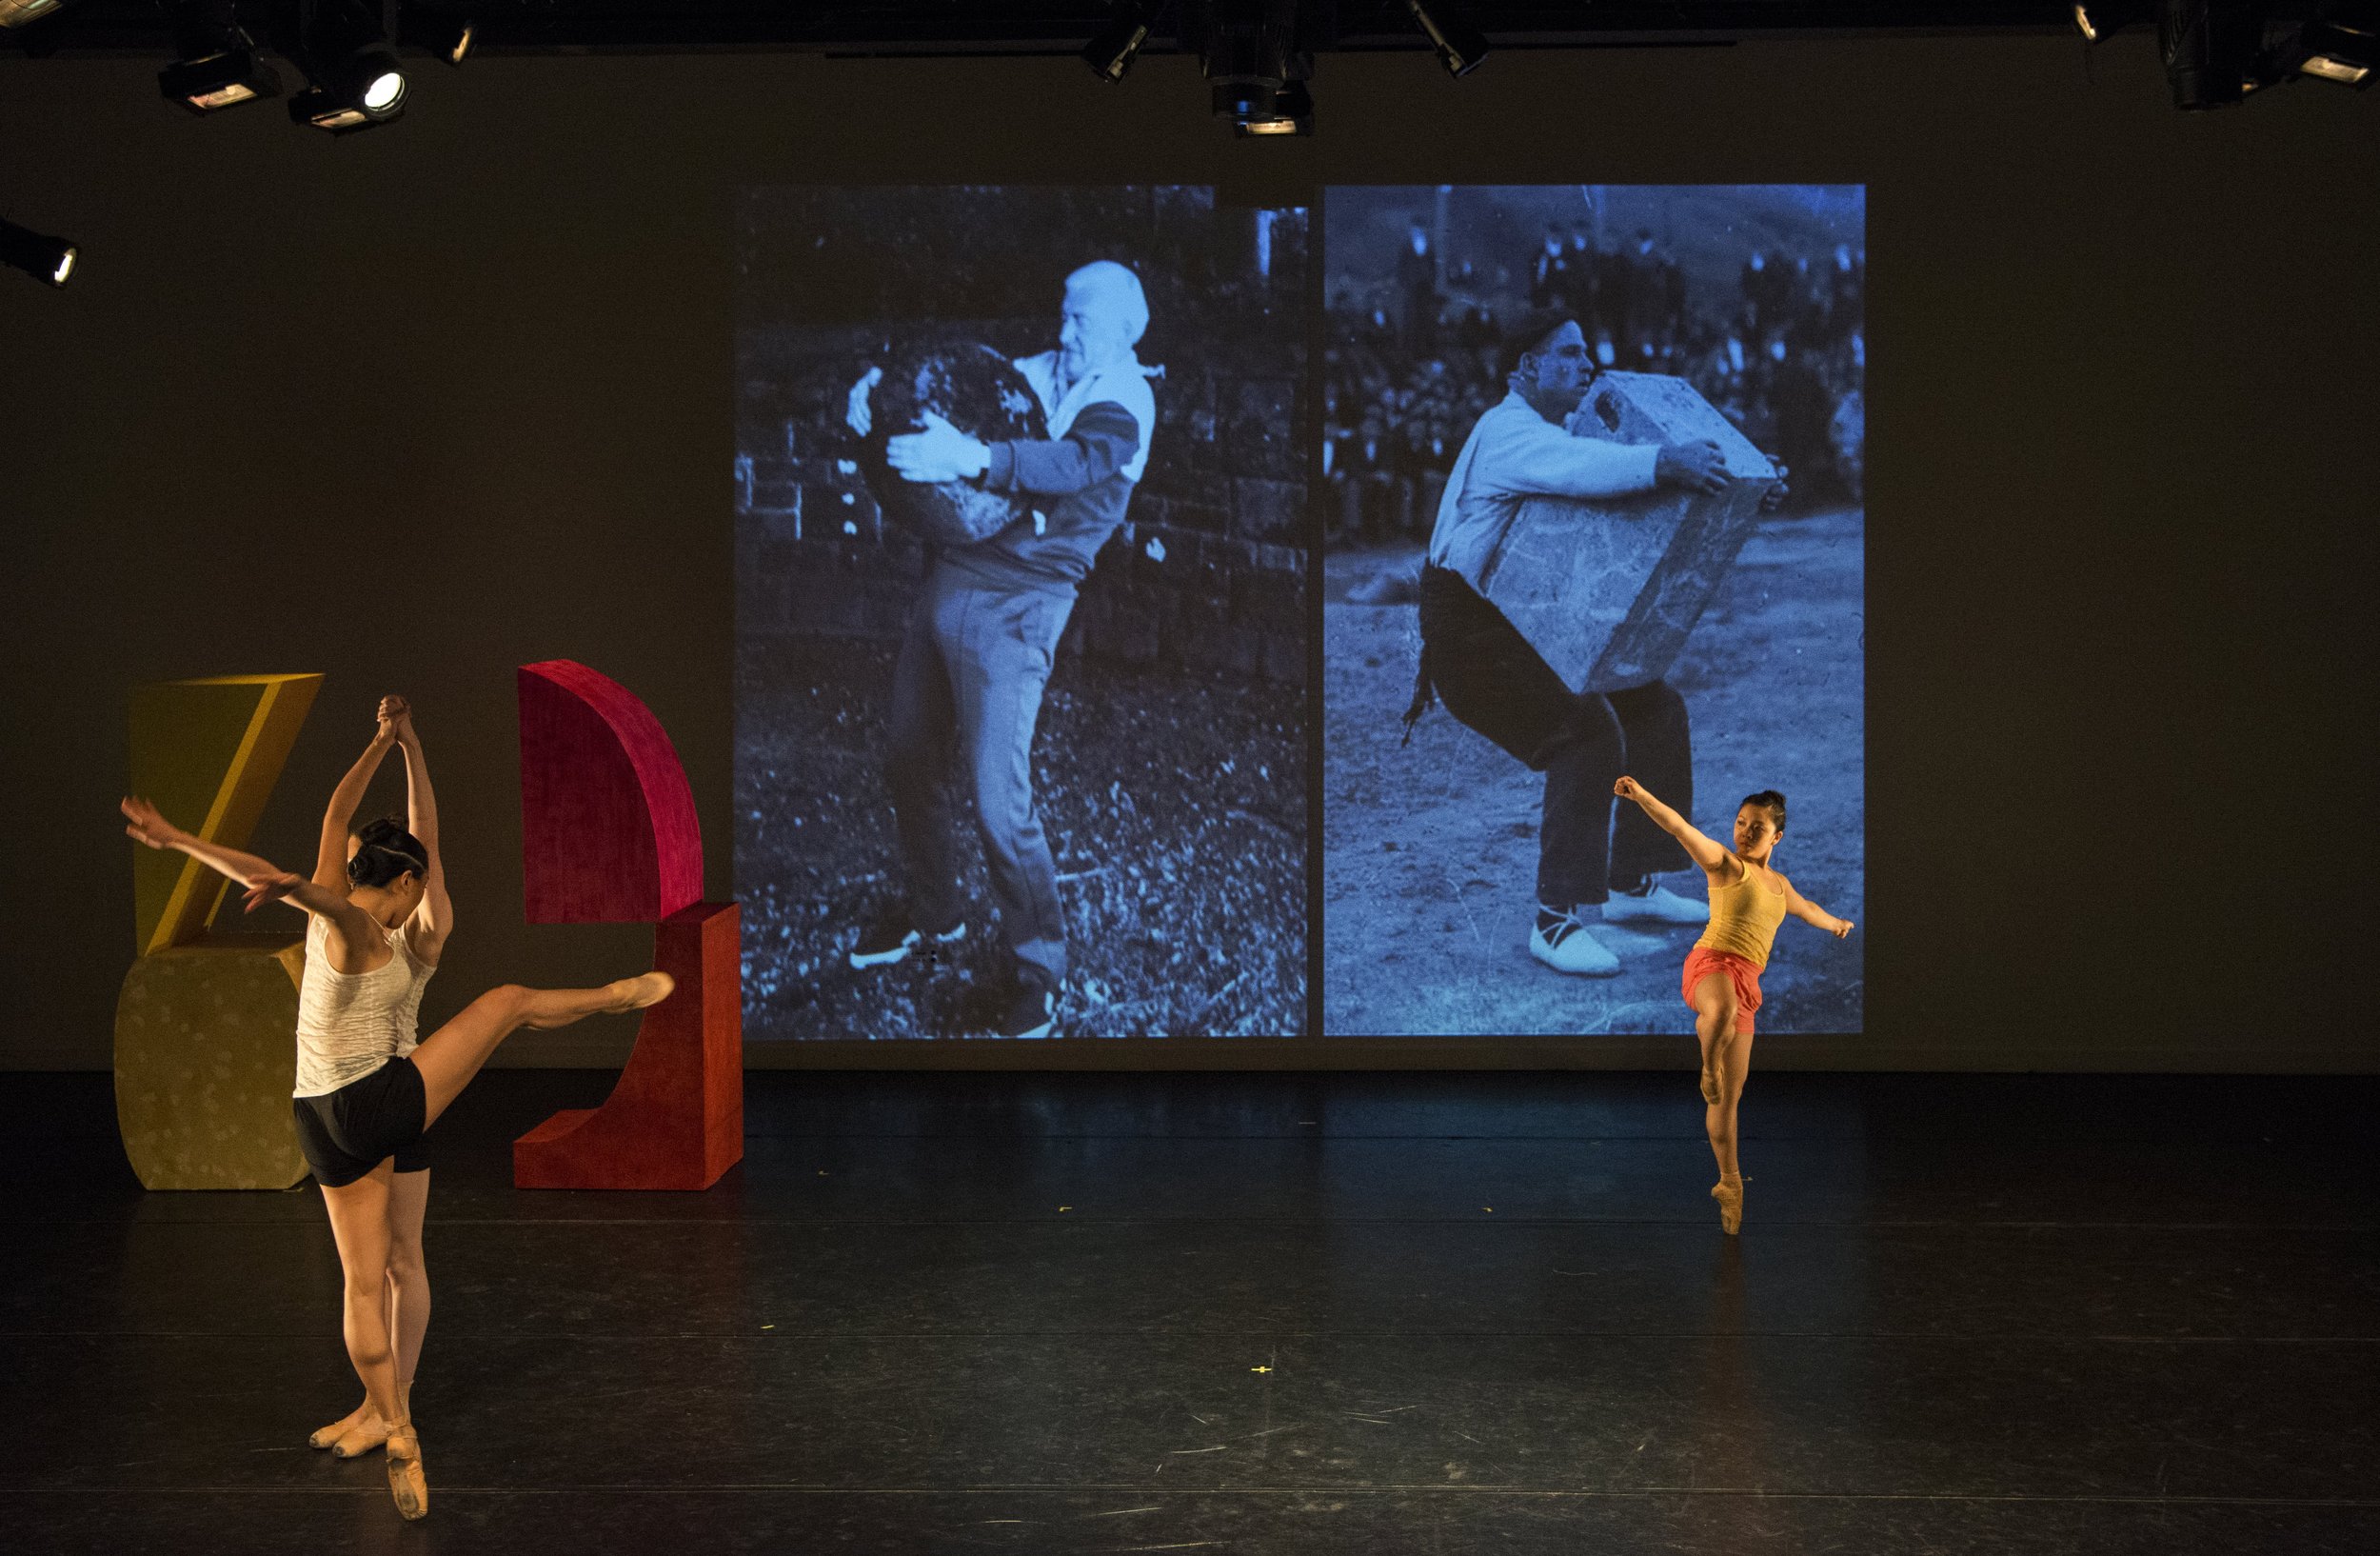  ”Immovable” by choreographer Julia K. Gleich in collaboration with visual artist Rachel Beach 